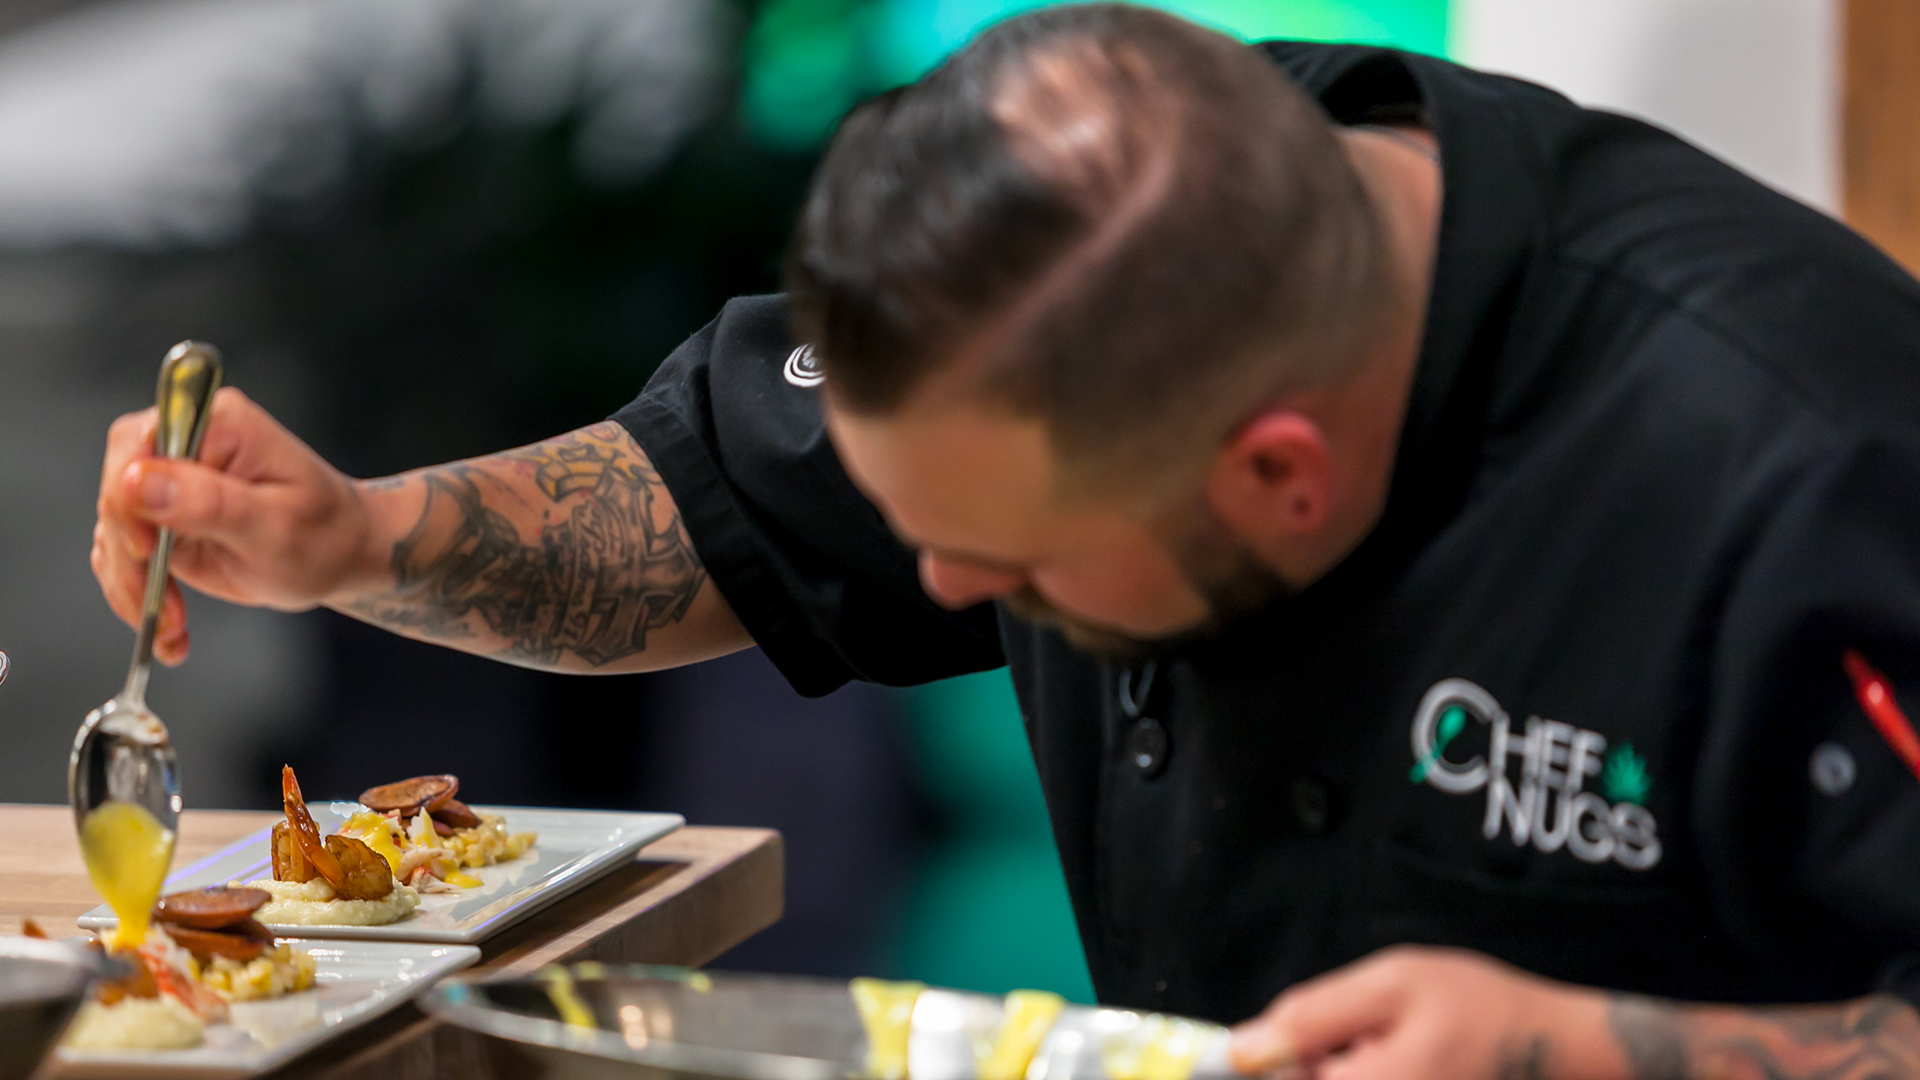 Chef Nugs, Cannabis, Weed, Cooking Competition, Cooking On High, Stage 13 Original, stage13network